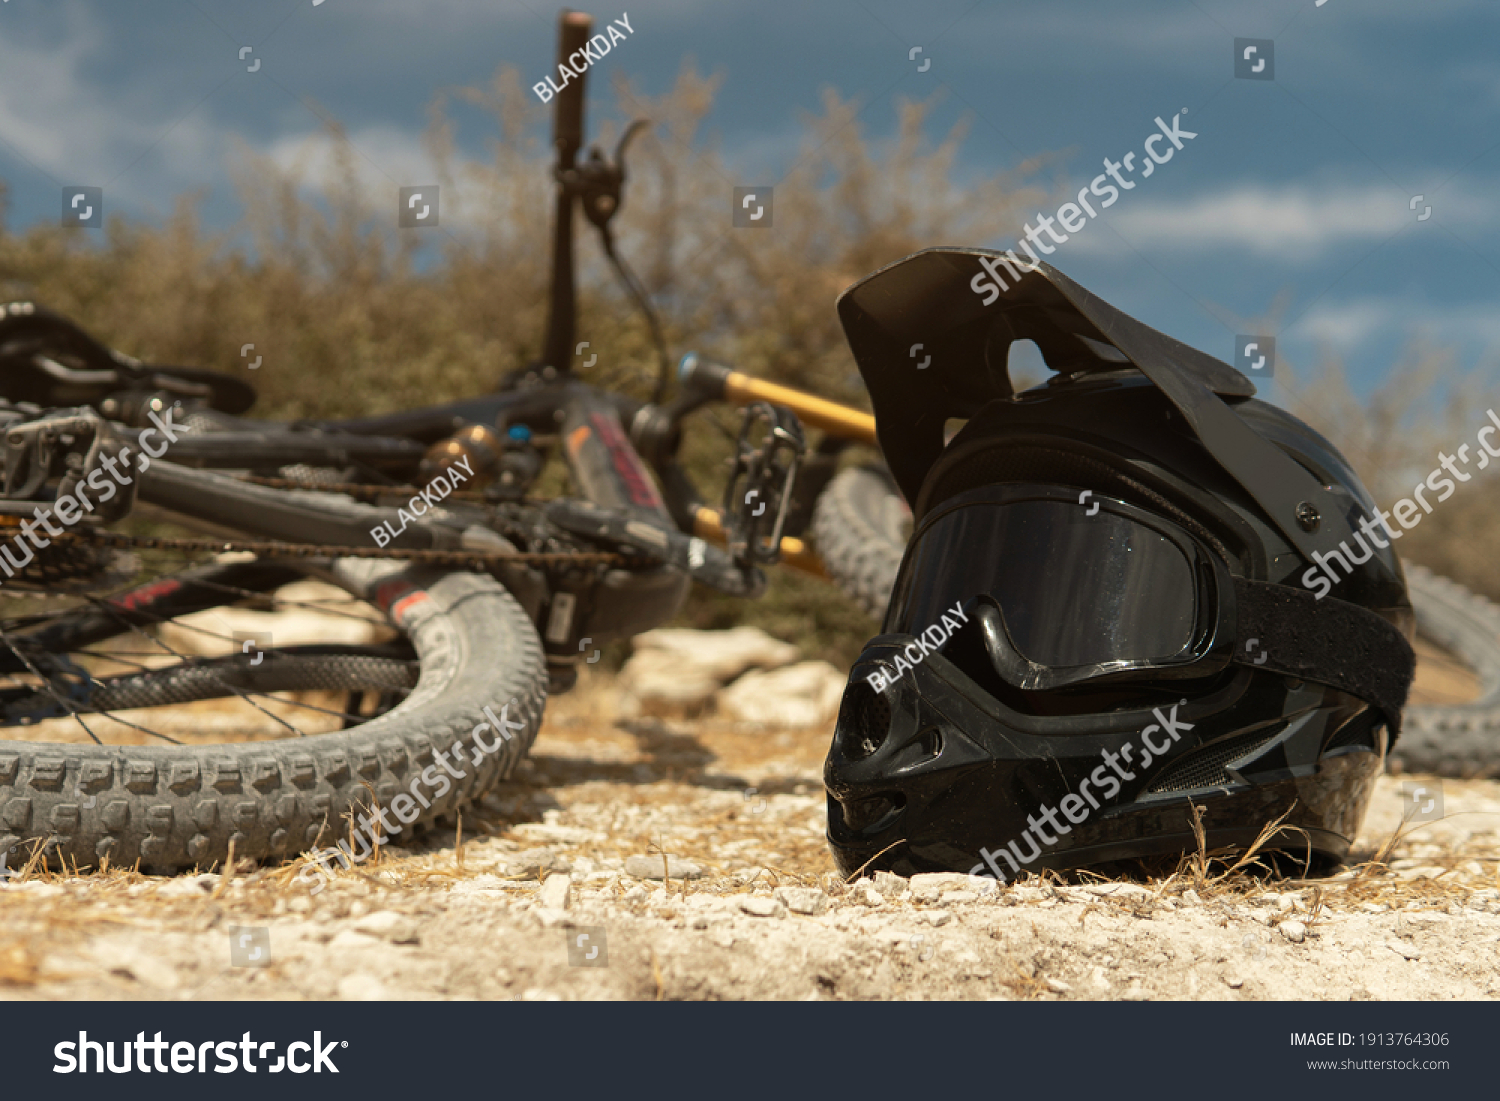 Professional MTB bike and helmet with a protective goggles for downhill cycling in mountains #1913764306